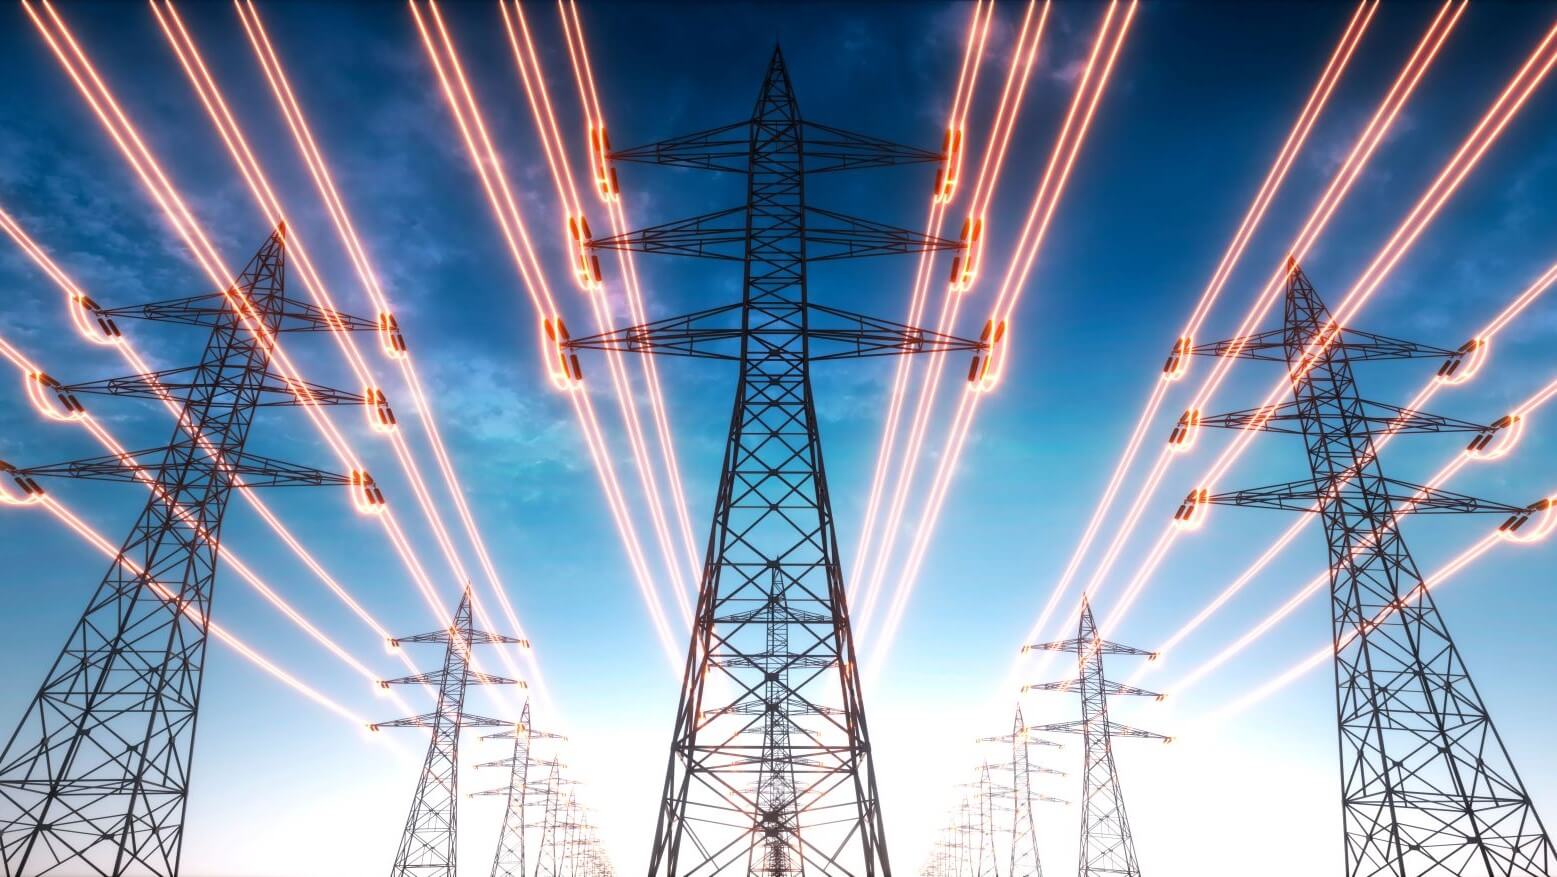 Graphic of a group of pylons with glowing cables connecting them